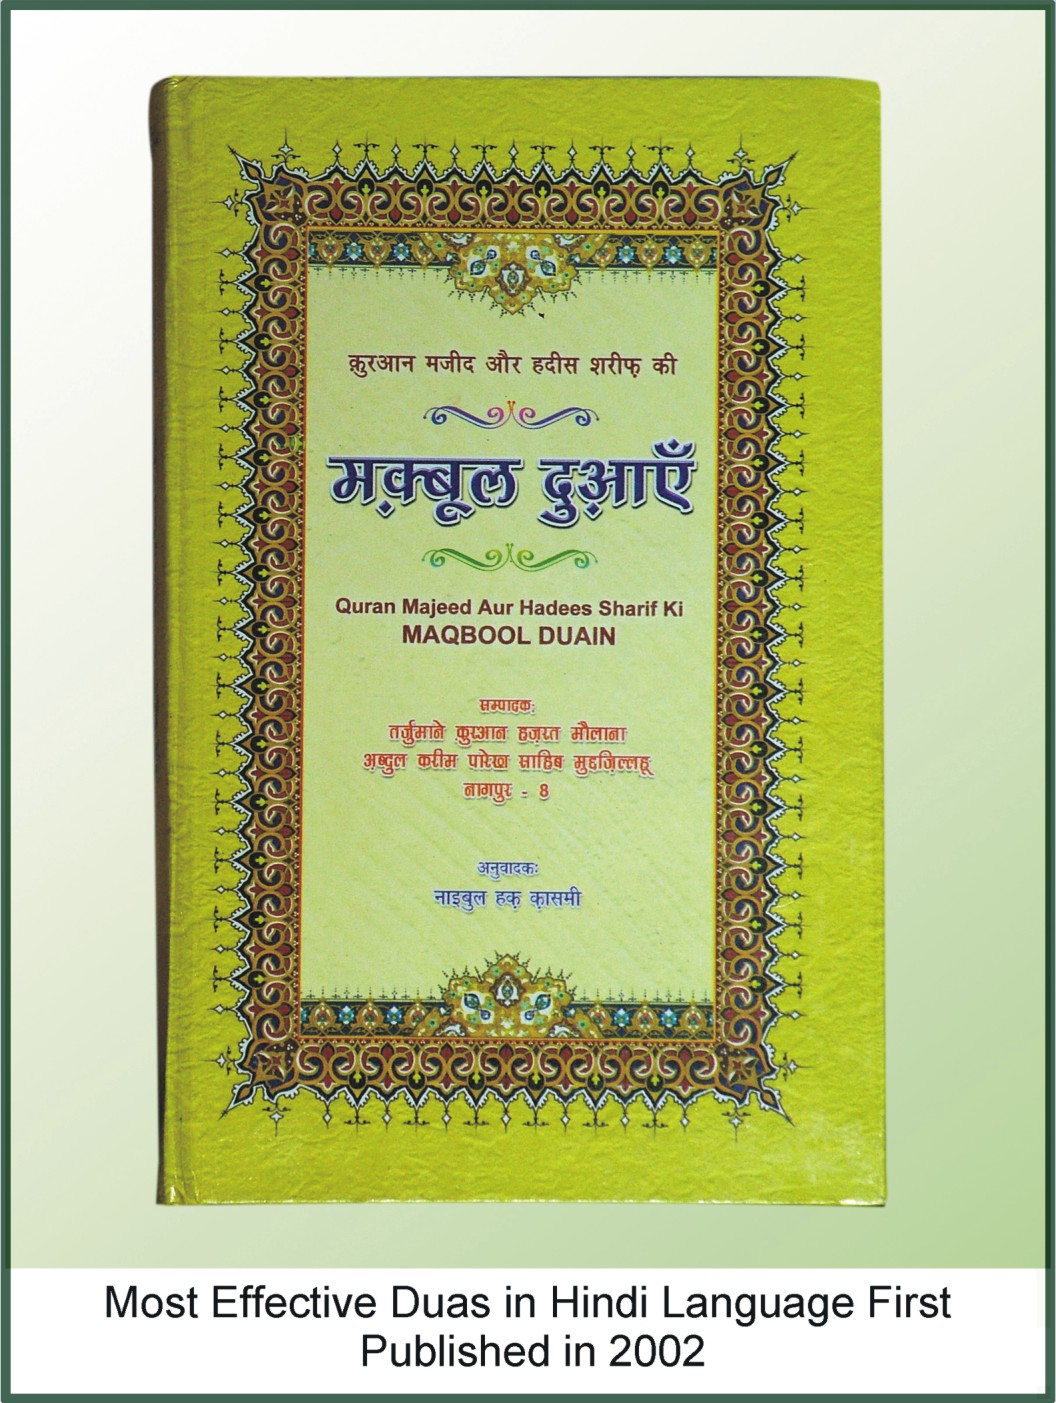 Most Effective Duas (Hindi) First Published in 2002